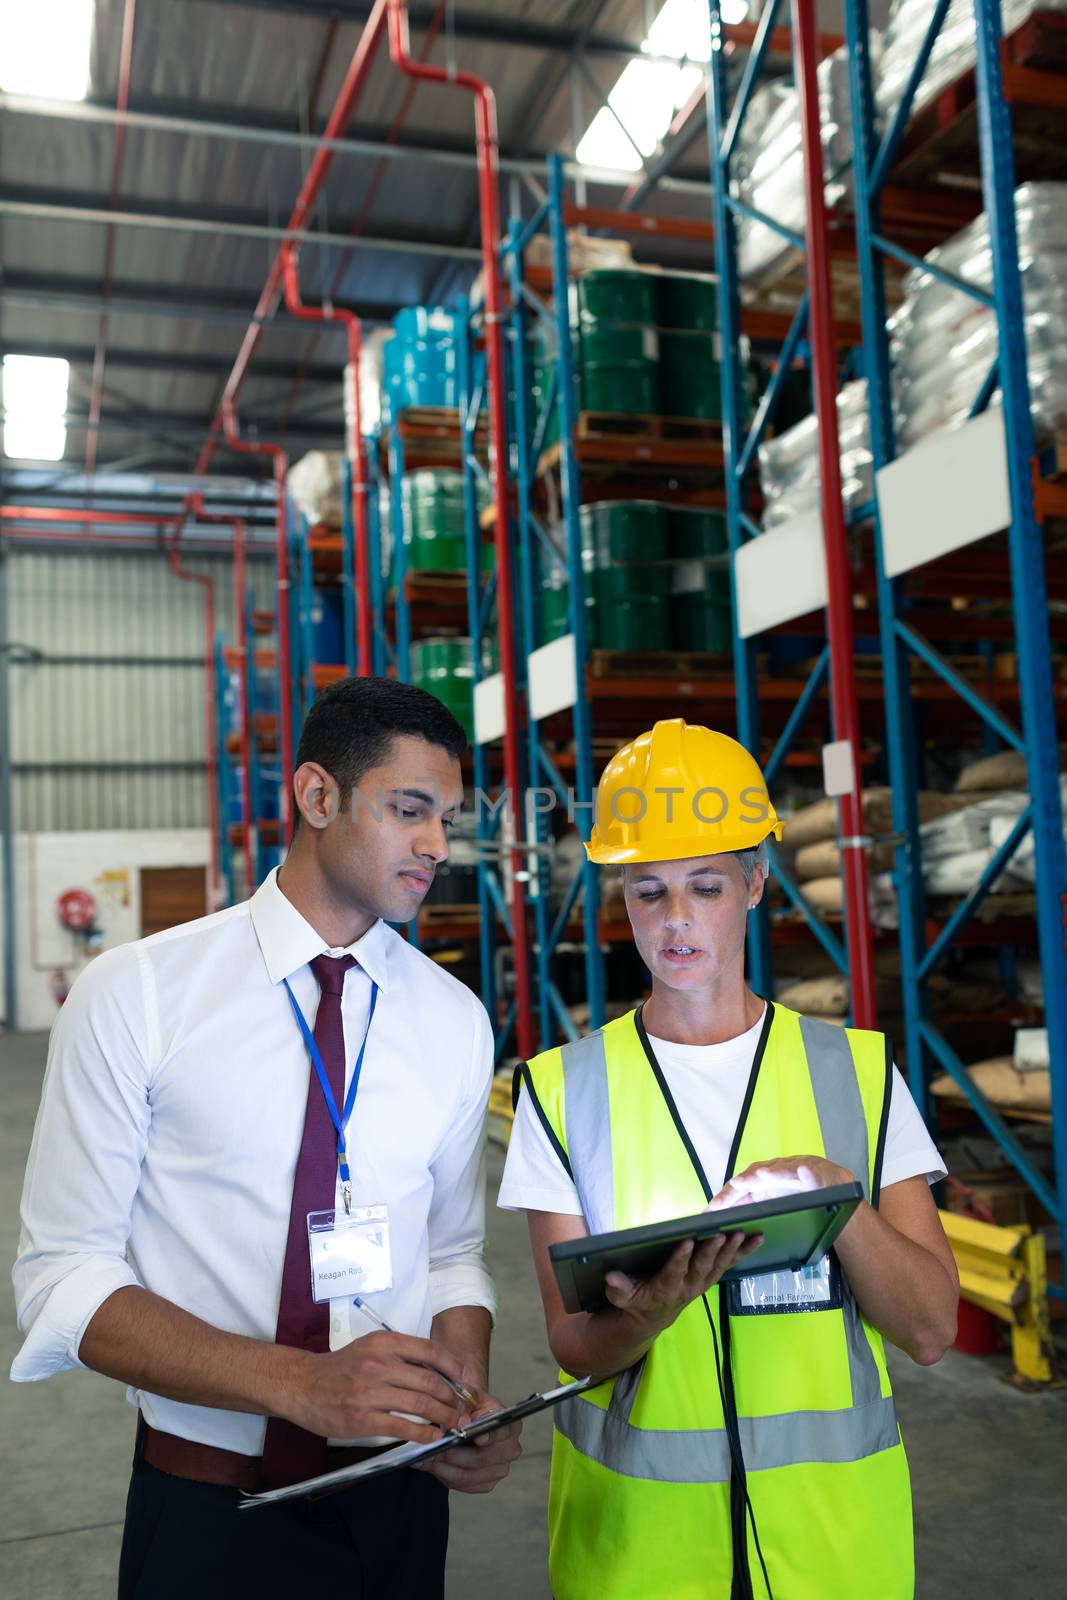 Warehouse staffs discussing over digital tablet in warehouse by Wavebreakmedia